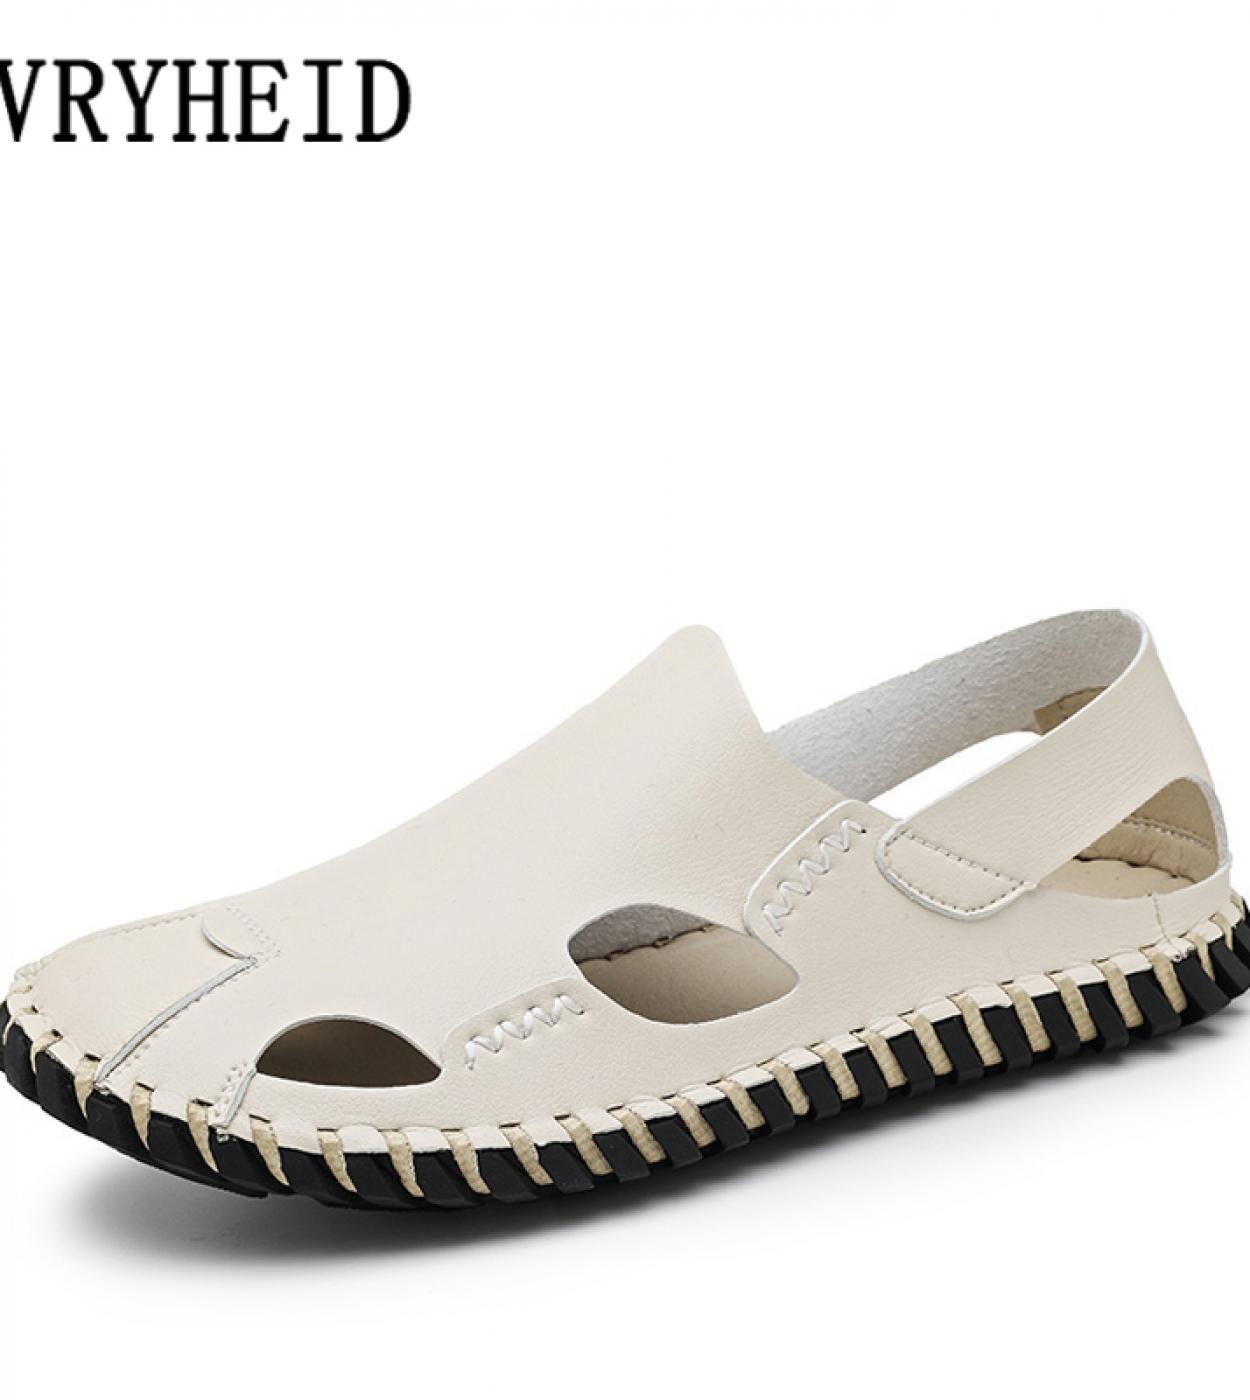 Vryheid Men Sandals 2022 New Summer Beach Wading Leather Shoes Soft Comfortable Outdoors Sport Casual Breathable Fisherm